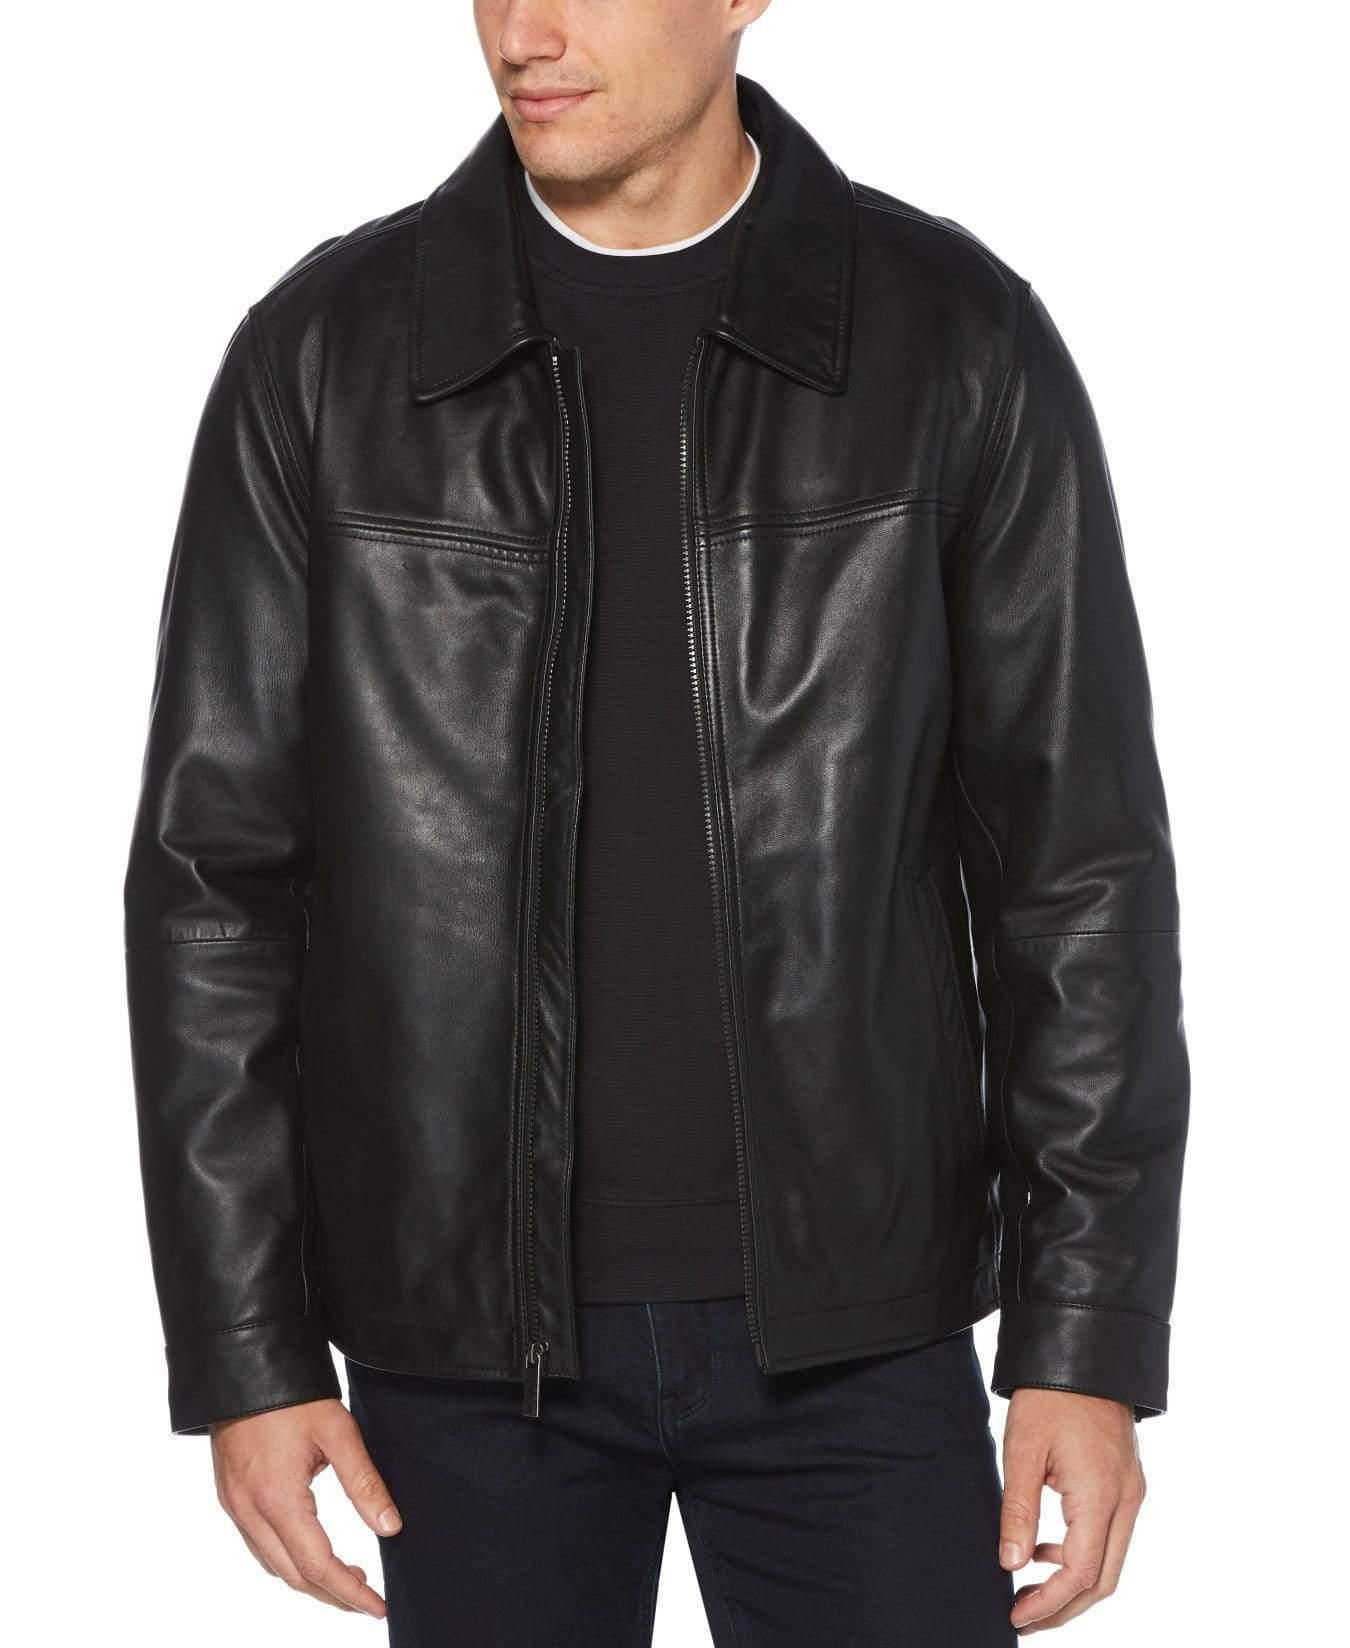 Perry Ellis Classic Leather Jacket in Black for Men - Lyst